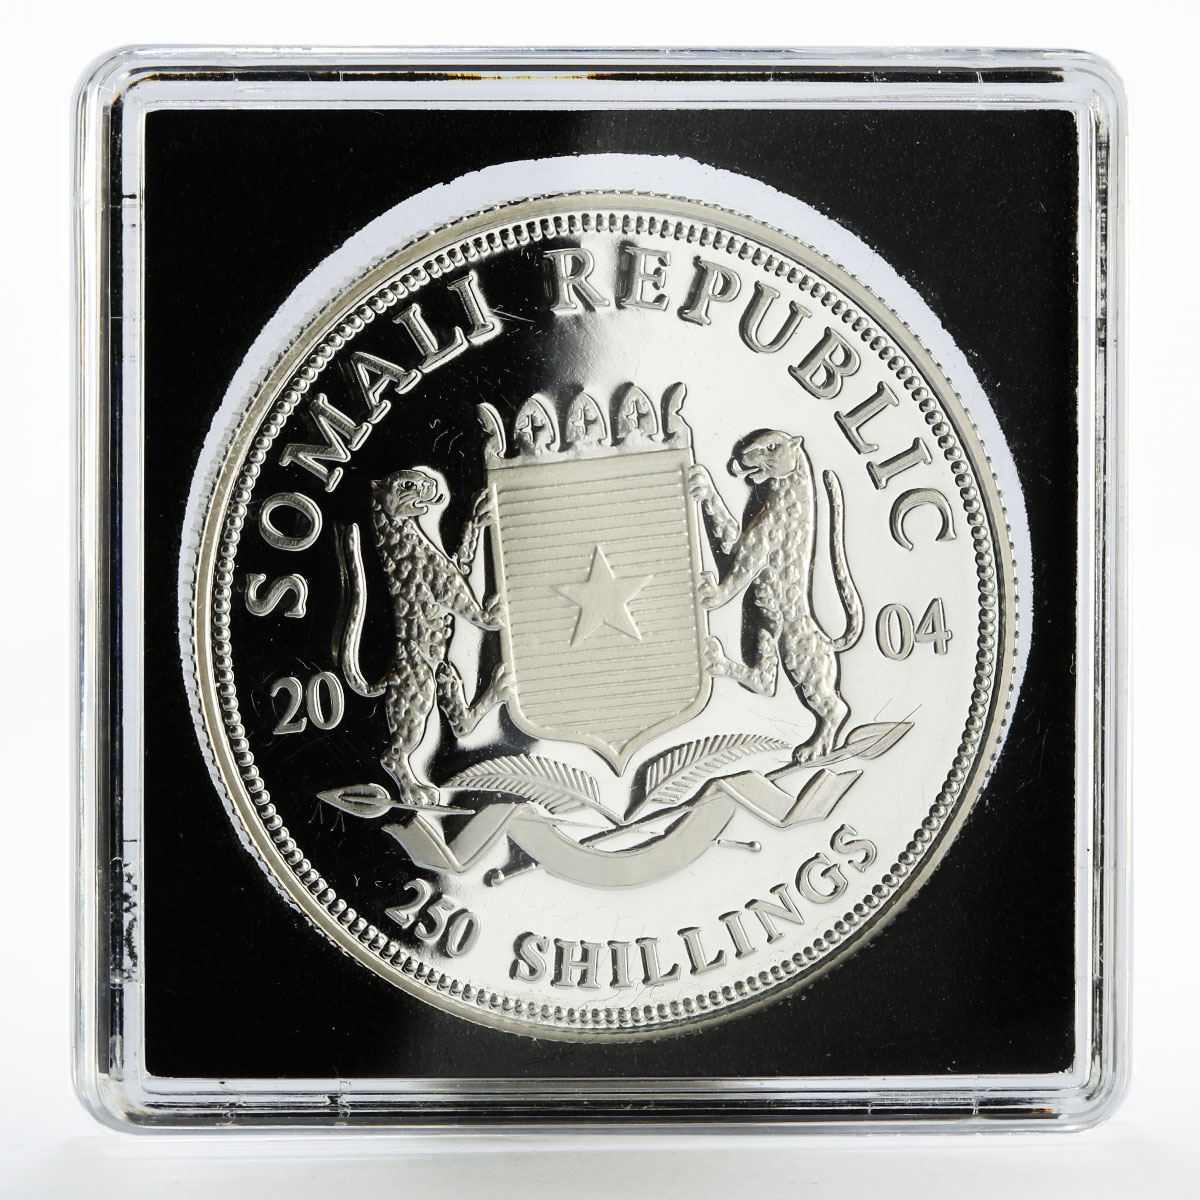 Somalia 250 shillings 250th Birthday of William Bligh proof silver coin 2004